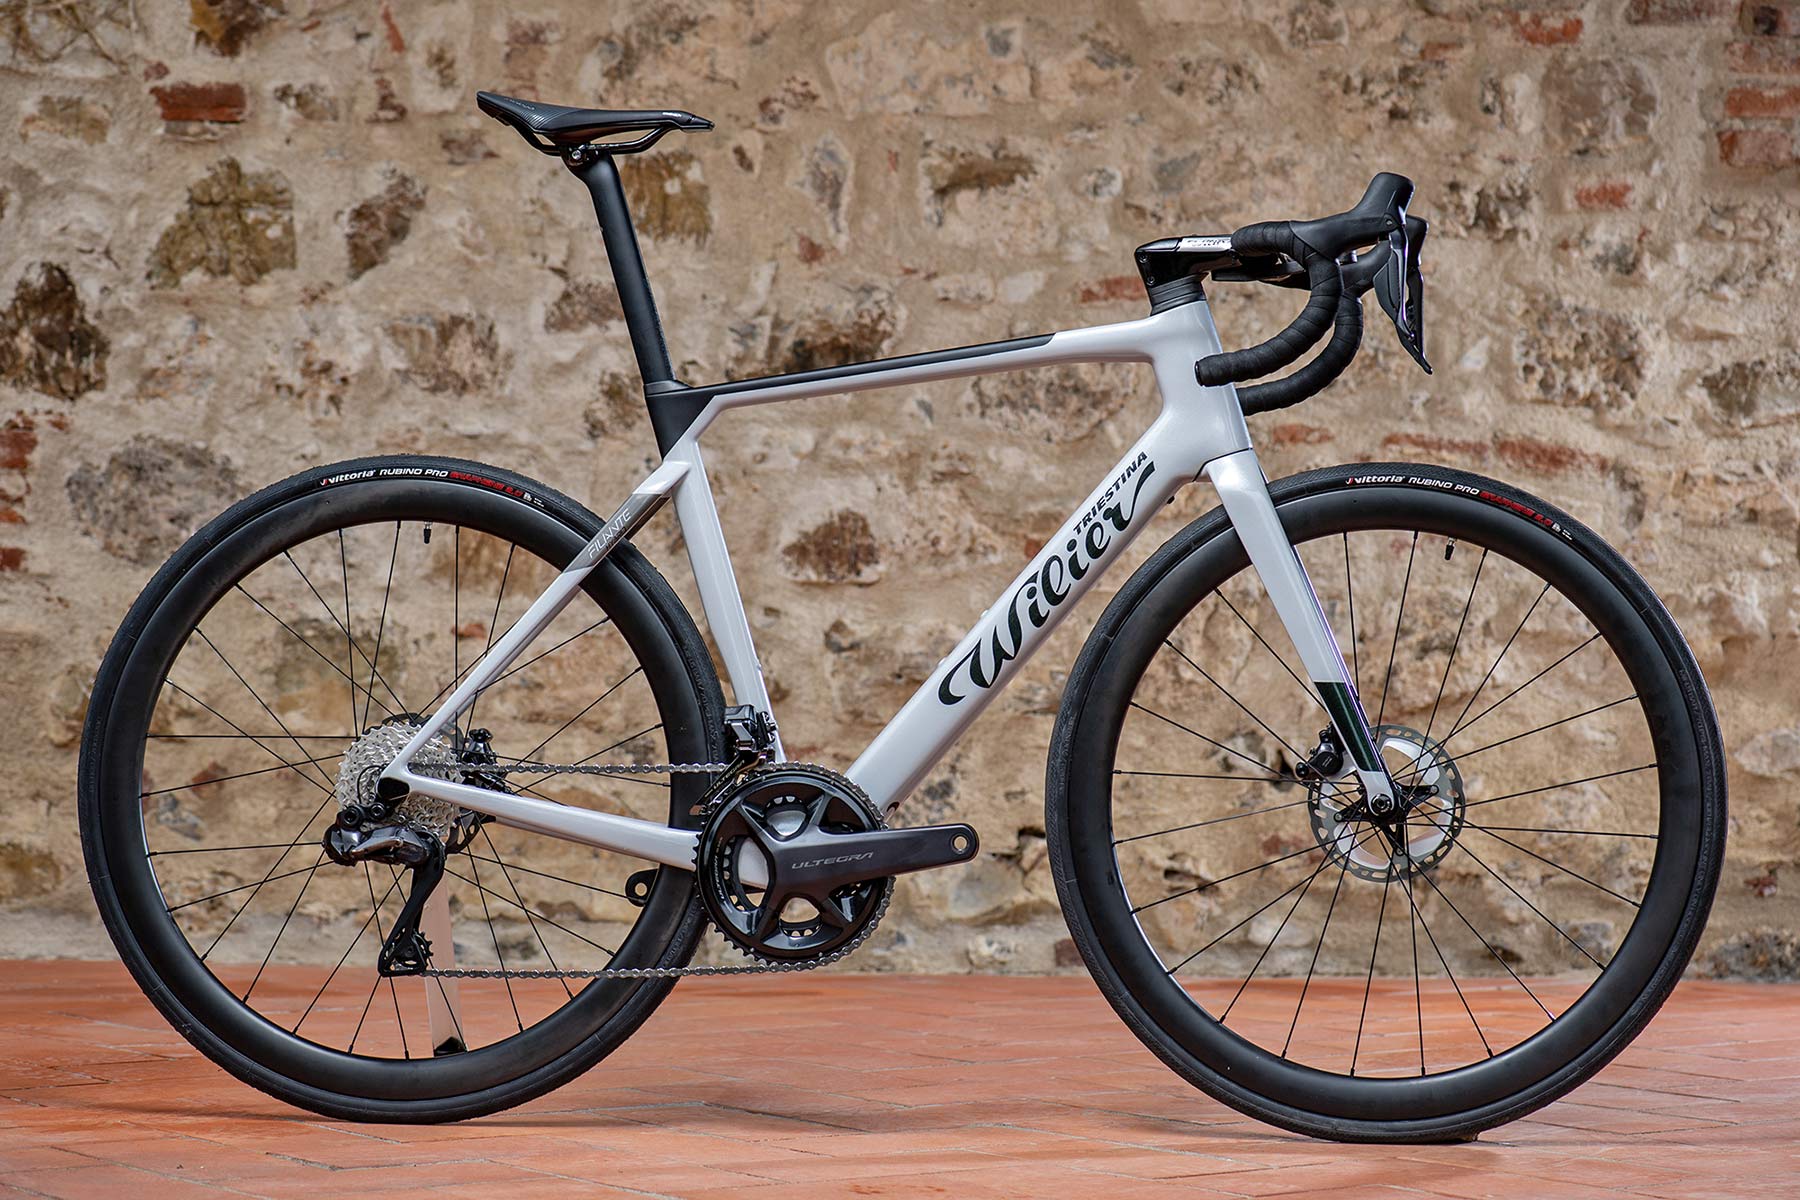 2022 Wilier Filante Hybrid stealthy carbon aero road e-bike, Road Bike Connection Spring, photo by Mirror Media